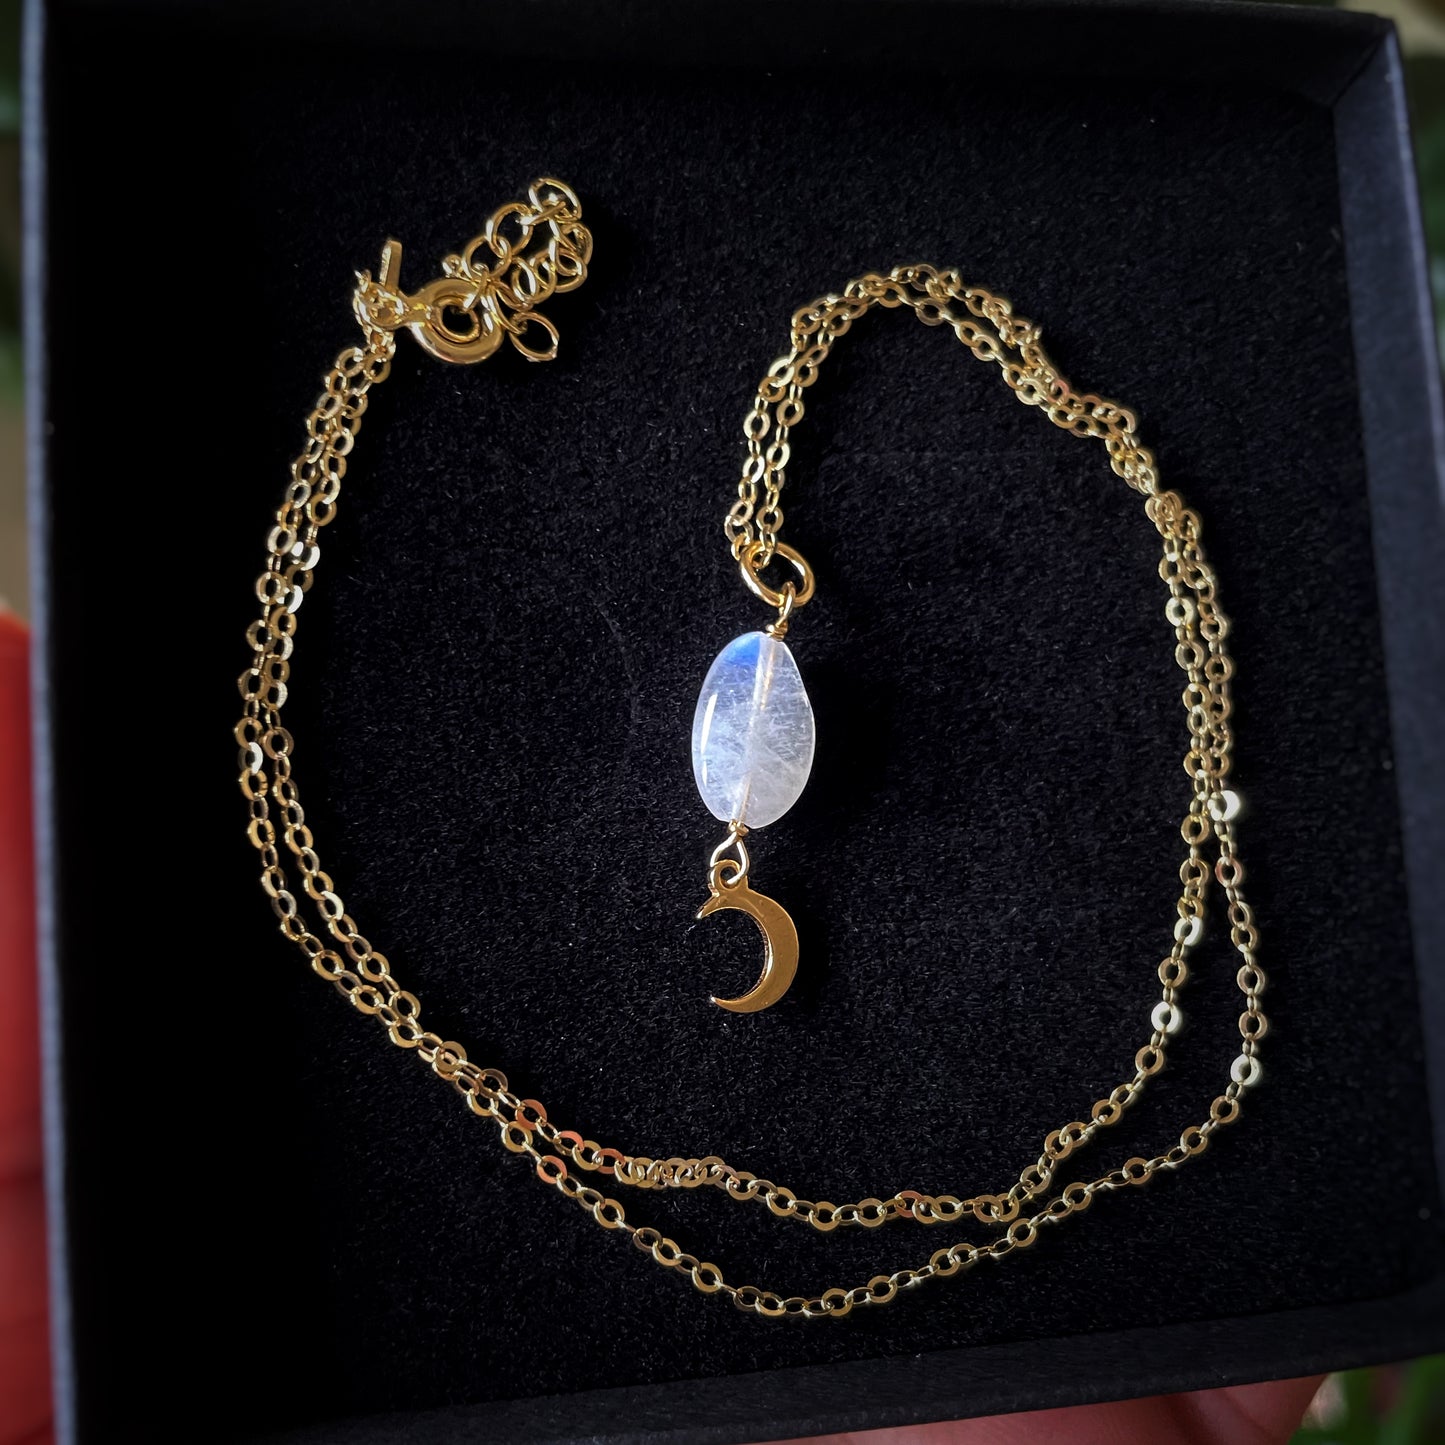 Moonstone with Moon charm